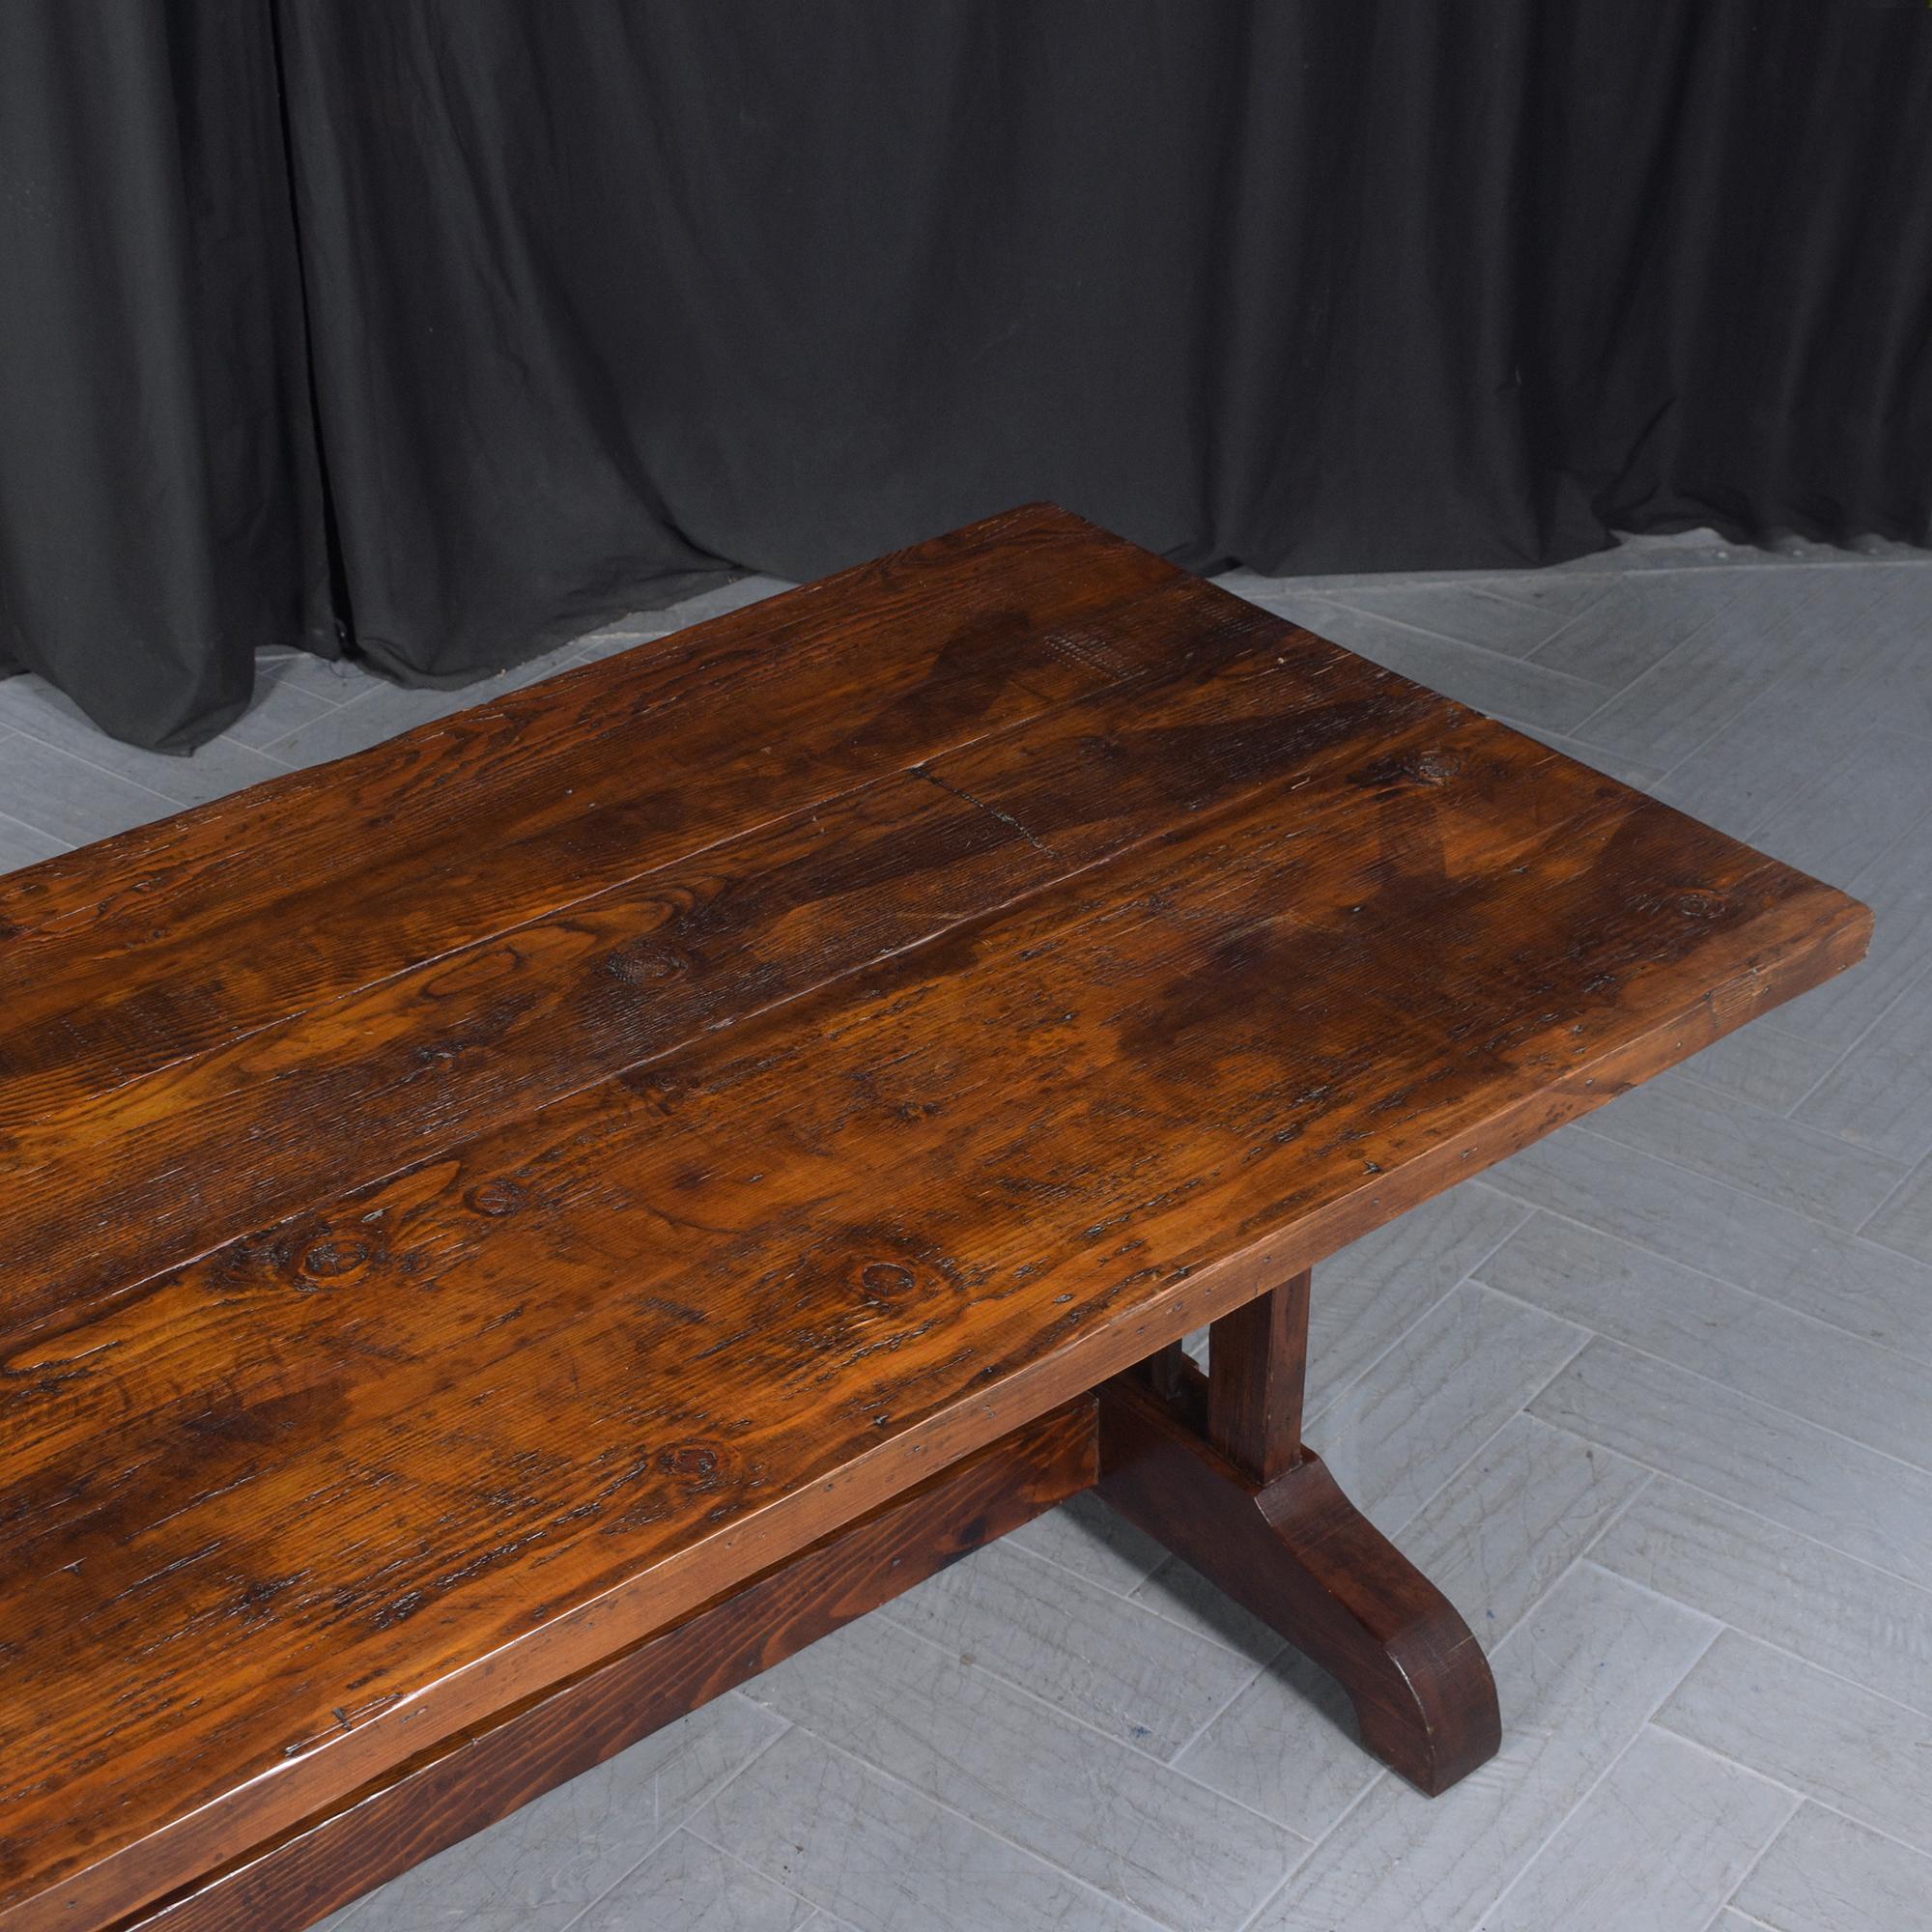 Spanish Vintage Solid Wood Dining Table with Iron Accents and Pedestal Legs For Sale